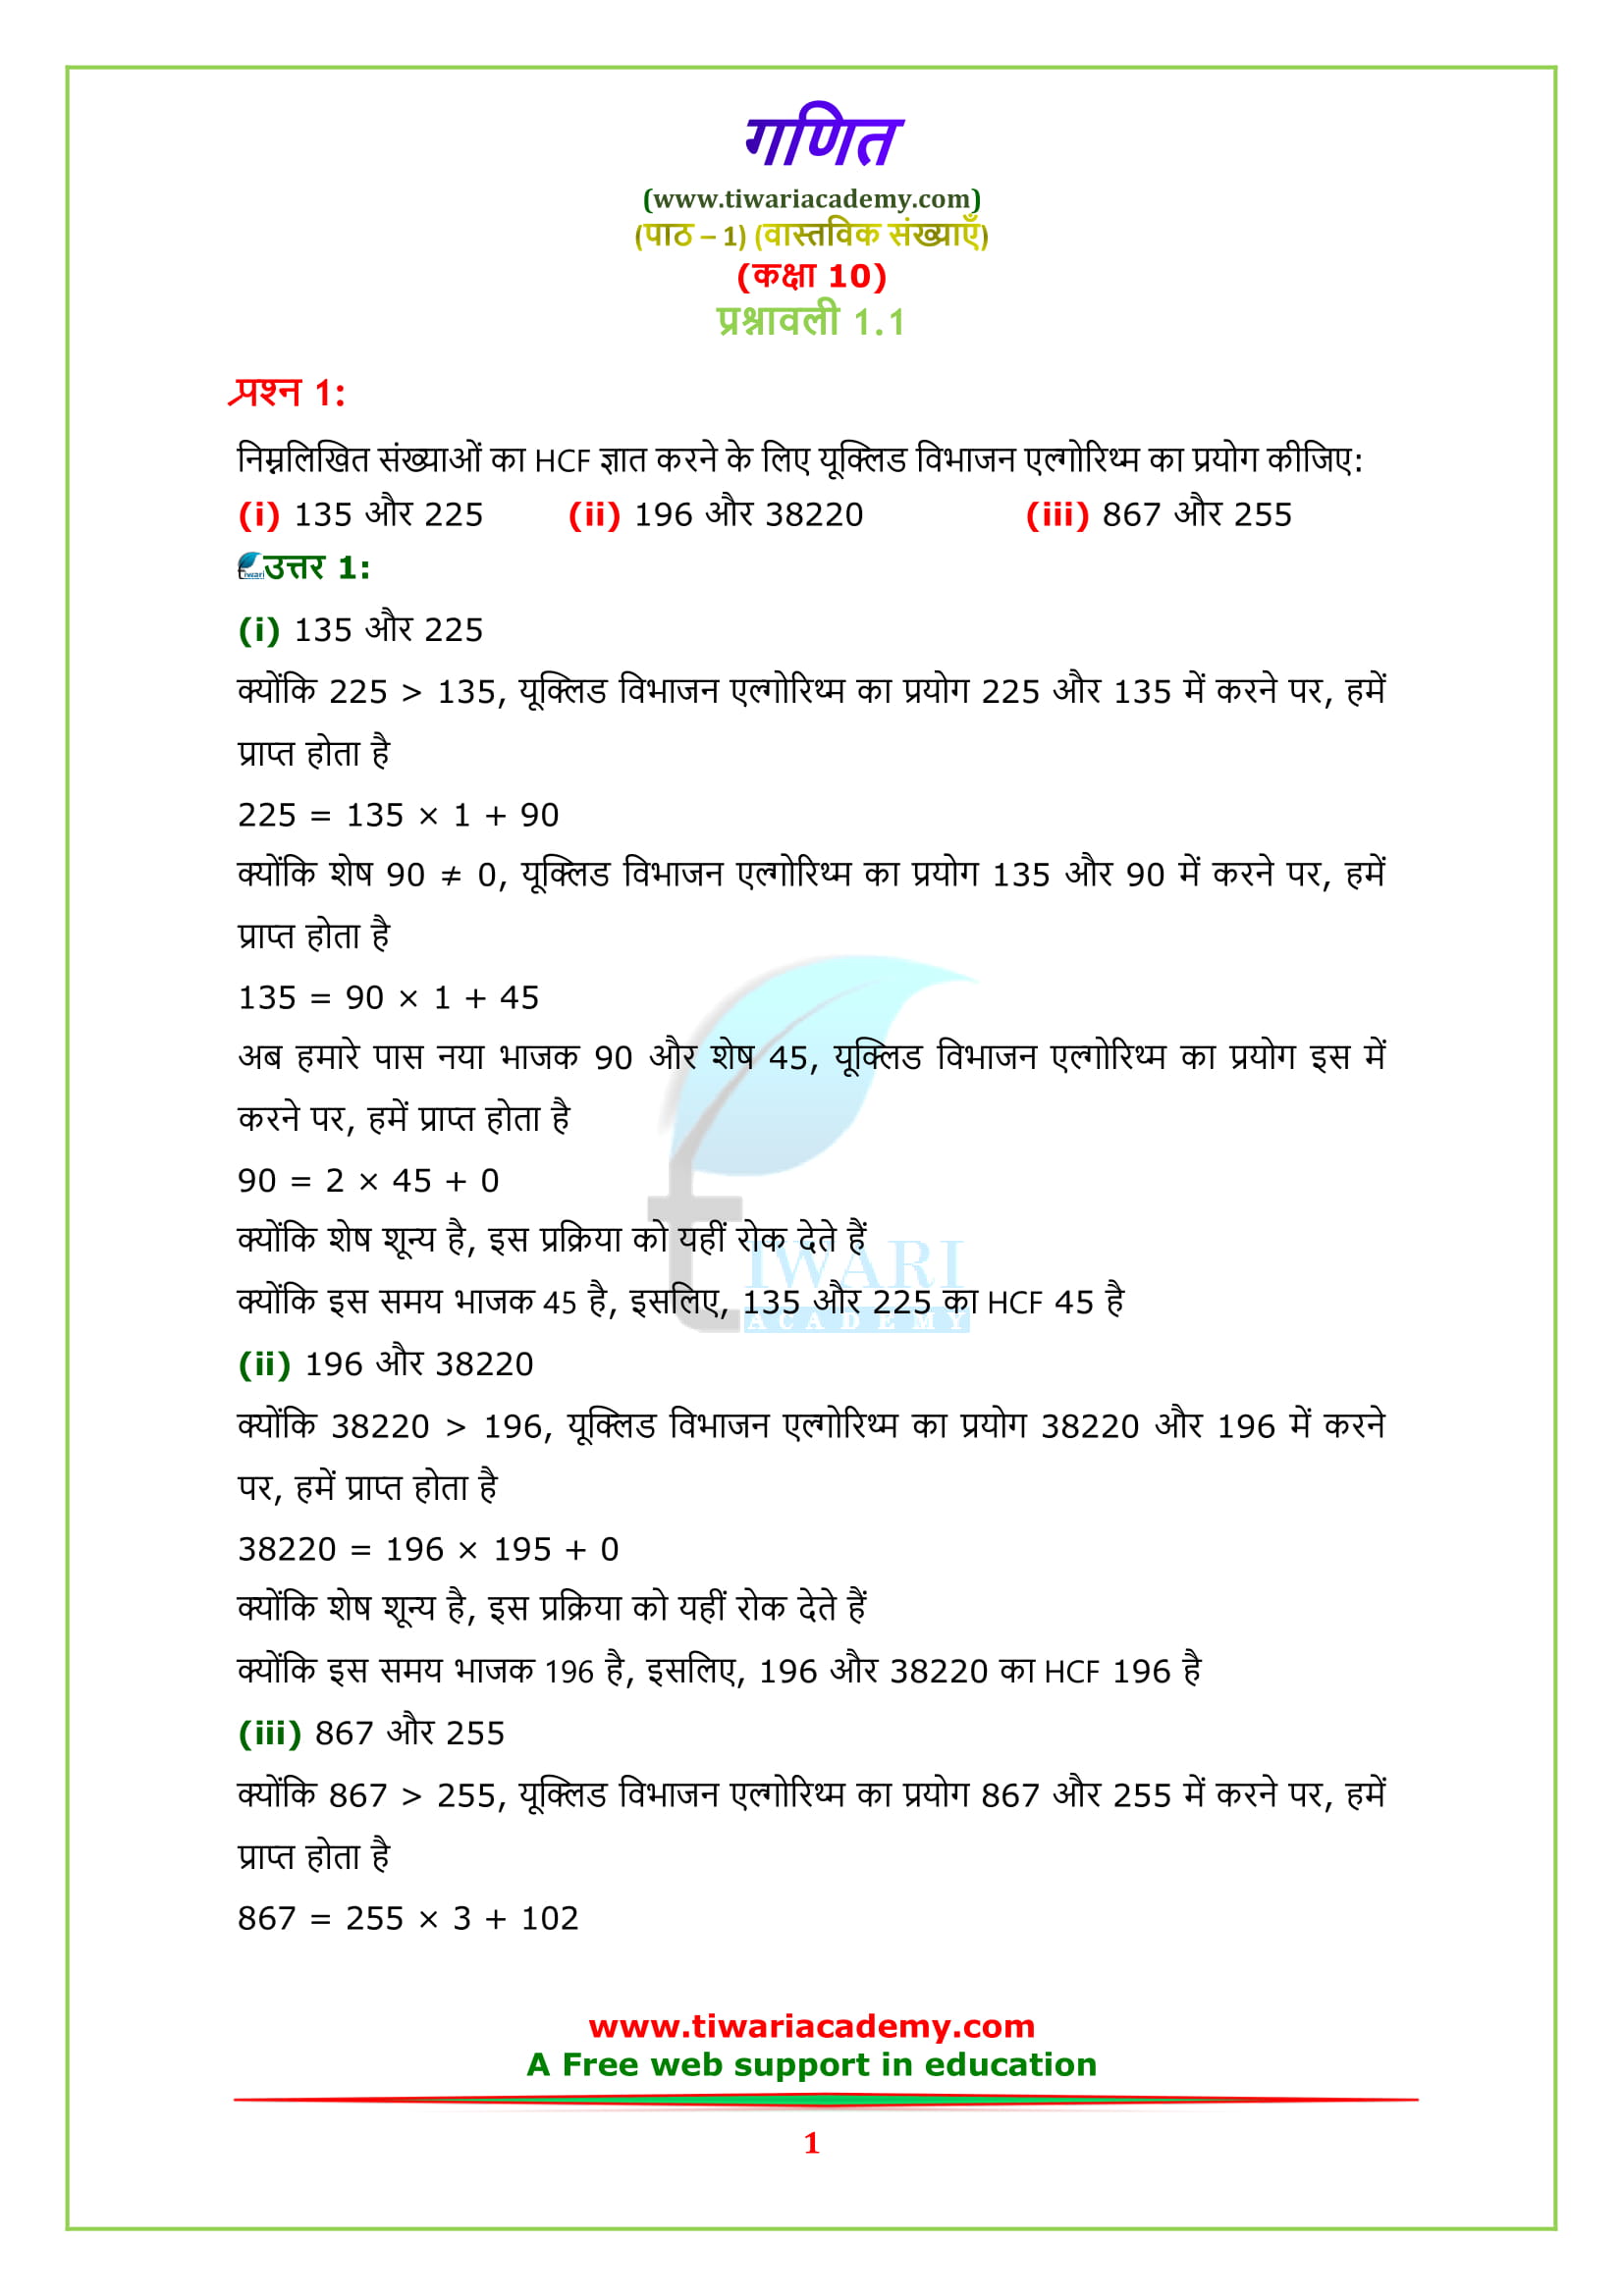 NCERT Solutions for class 10 Maths Chapter 1 Exercise 1.1 in Hindi Medium